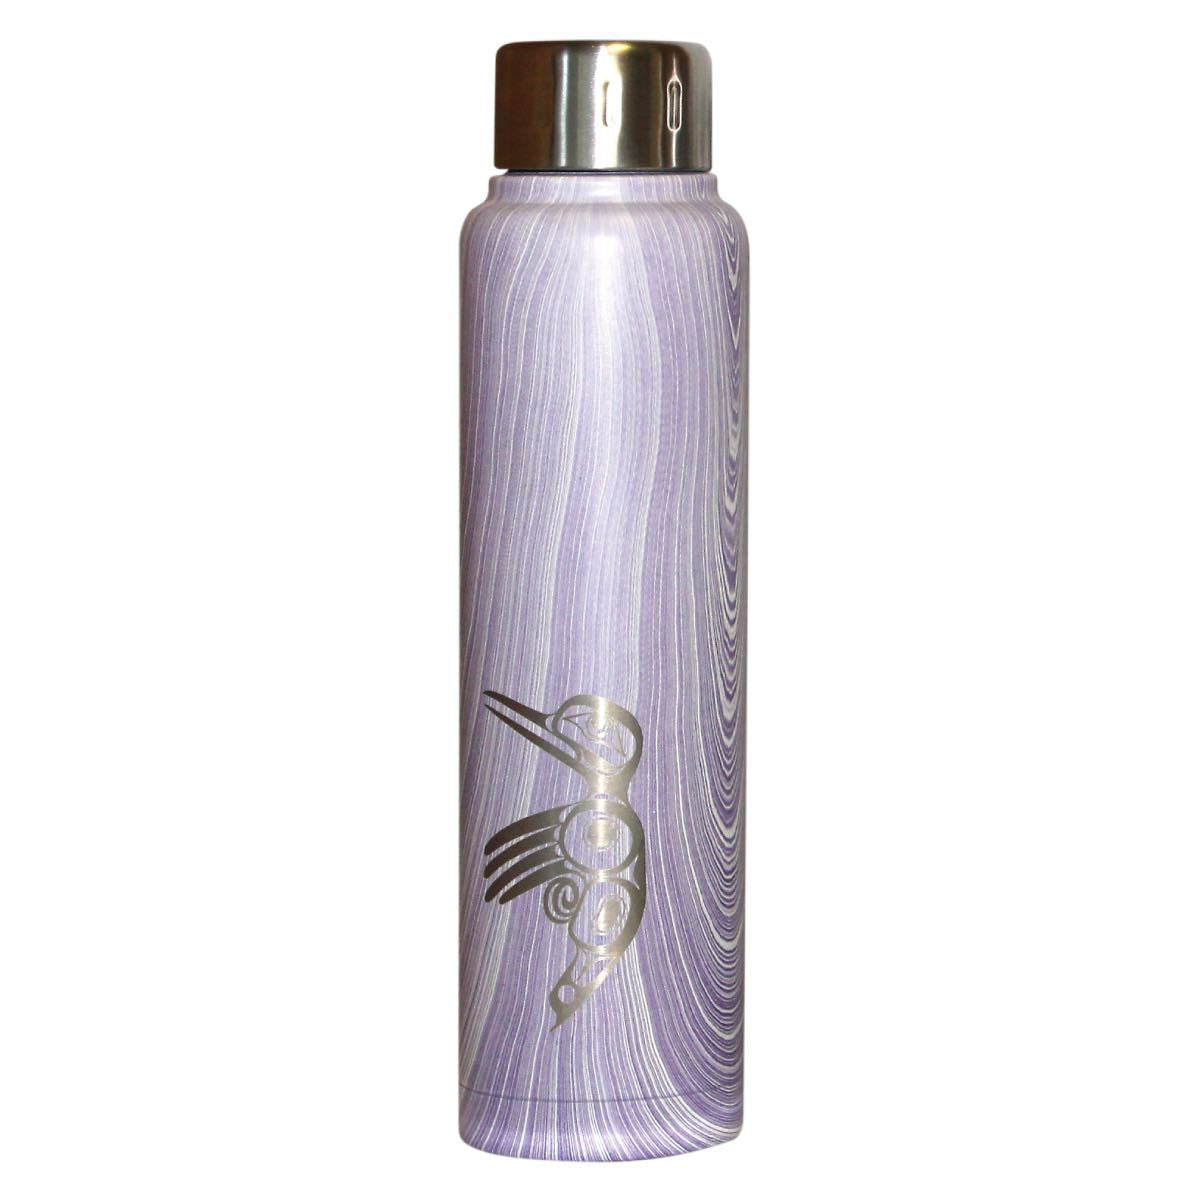 Insulated Stainless Steel Totem Bottle - Hummingbird by Ryan Cranmer